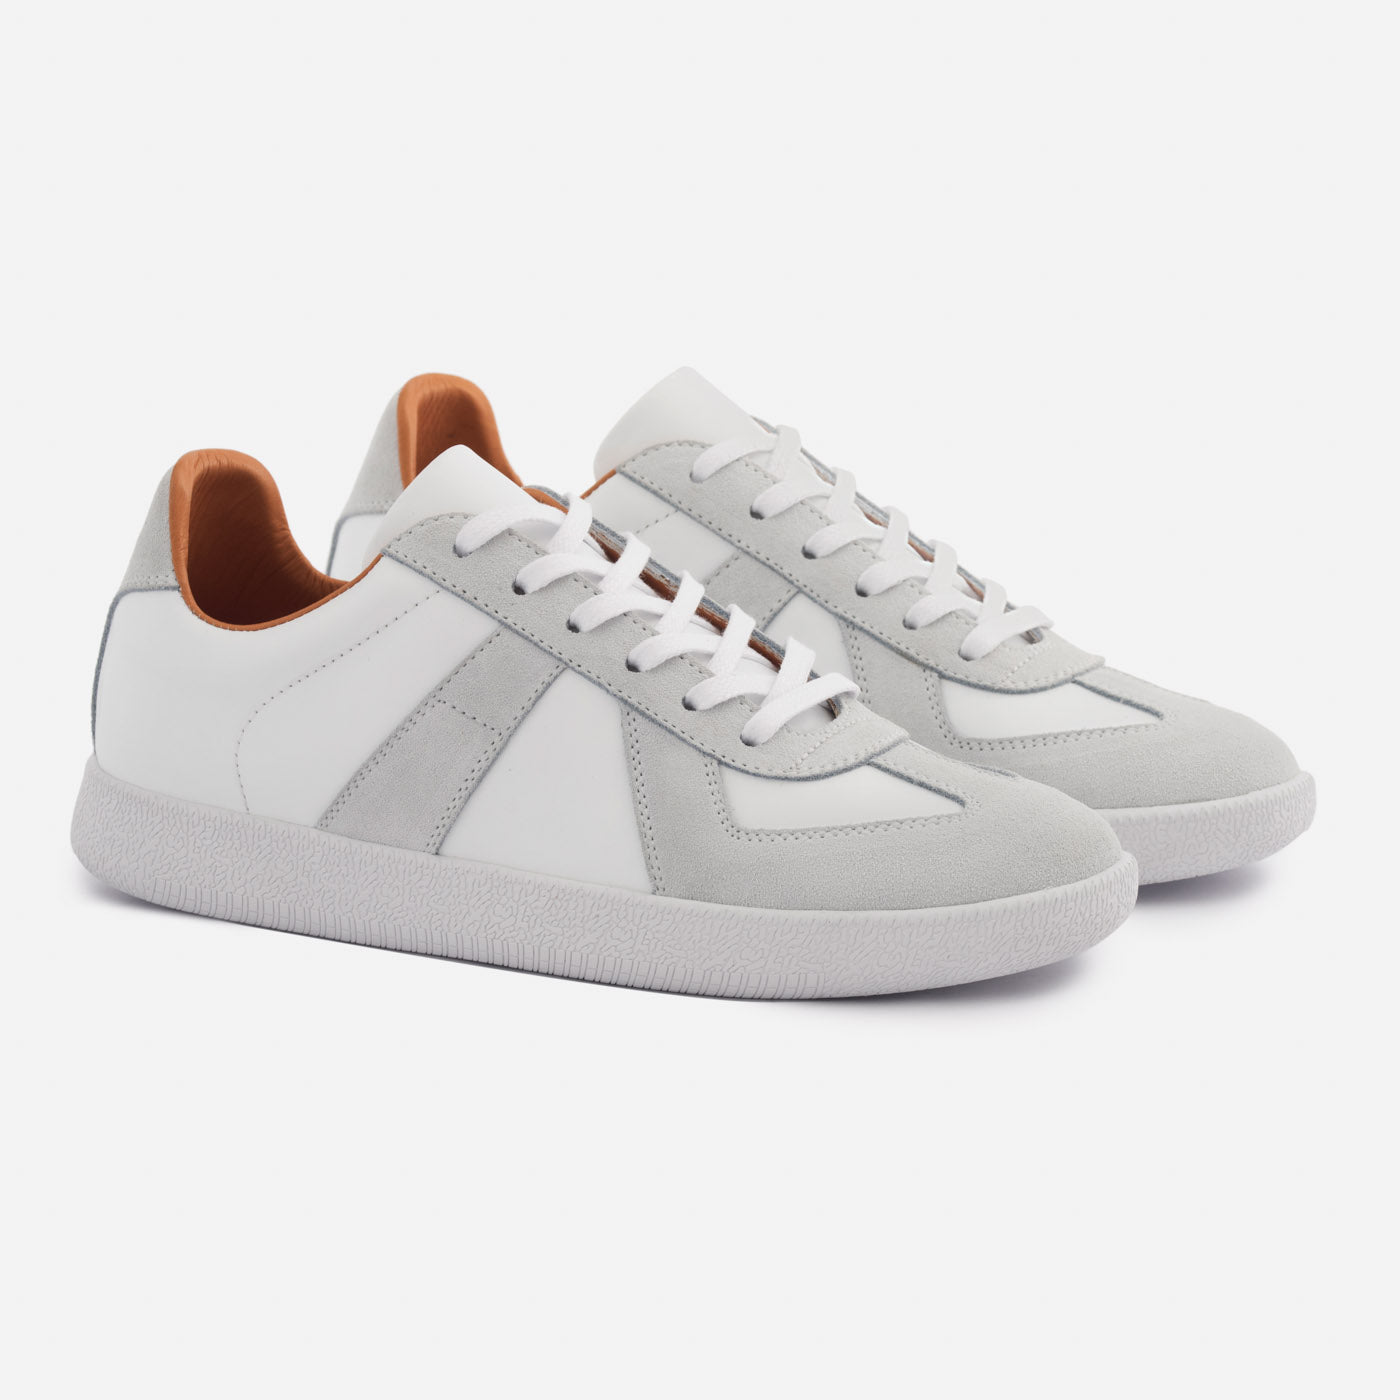 Morgen Trainers - Leather/Suede - Women's